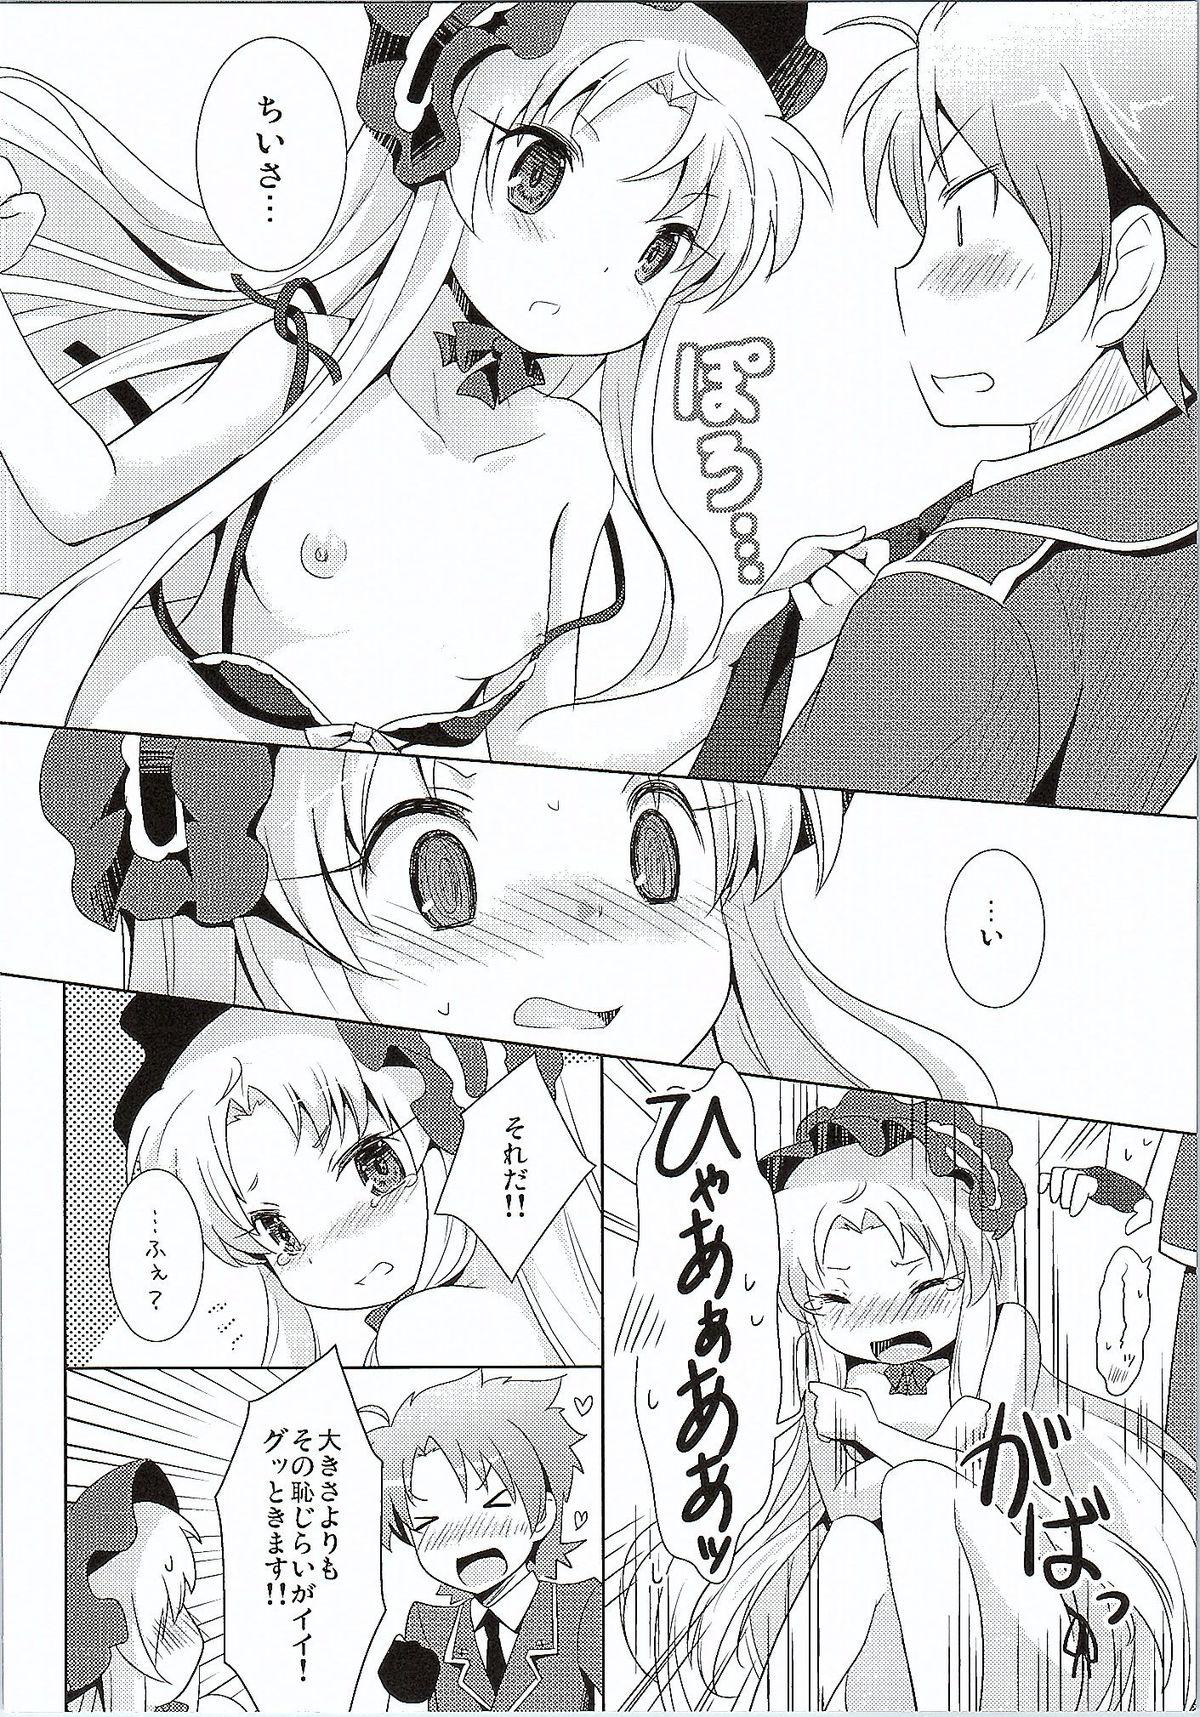 Canadian Breaker Complex - Kaitou tenshi twin angel Licking Pussy - Page 7